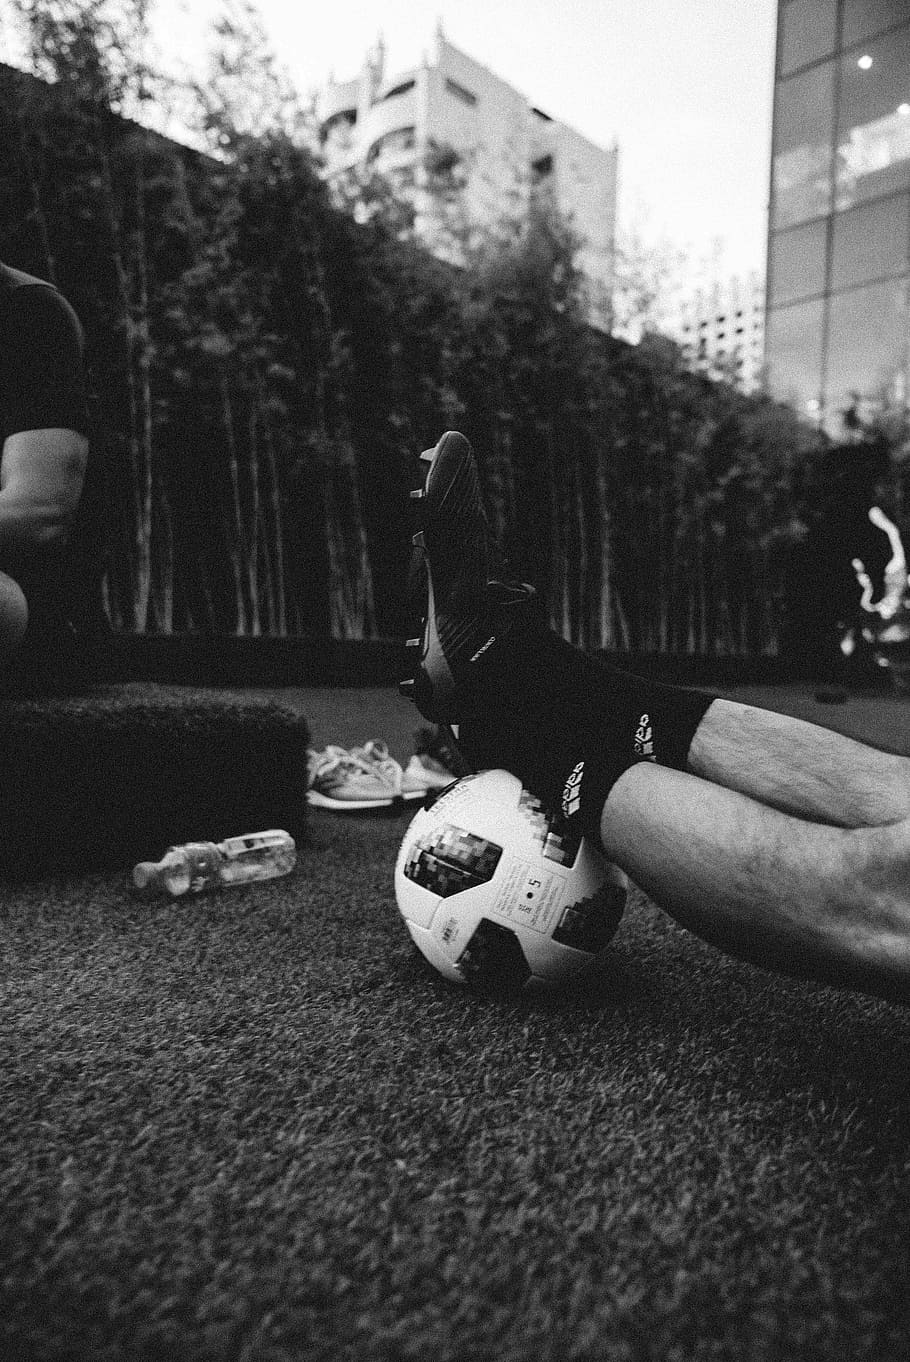 HD wallpaper: gray scale photo of a person's feet on a football, grayscale  photo of person's feet on soccer ball | Wallpaper Flare